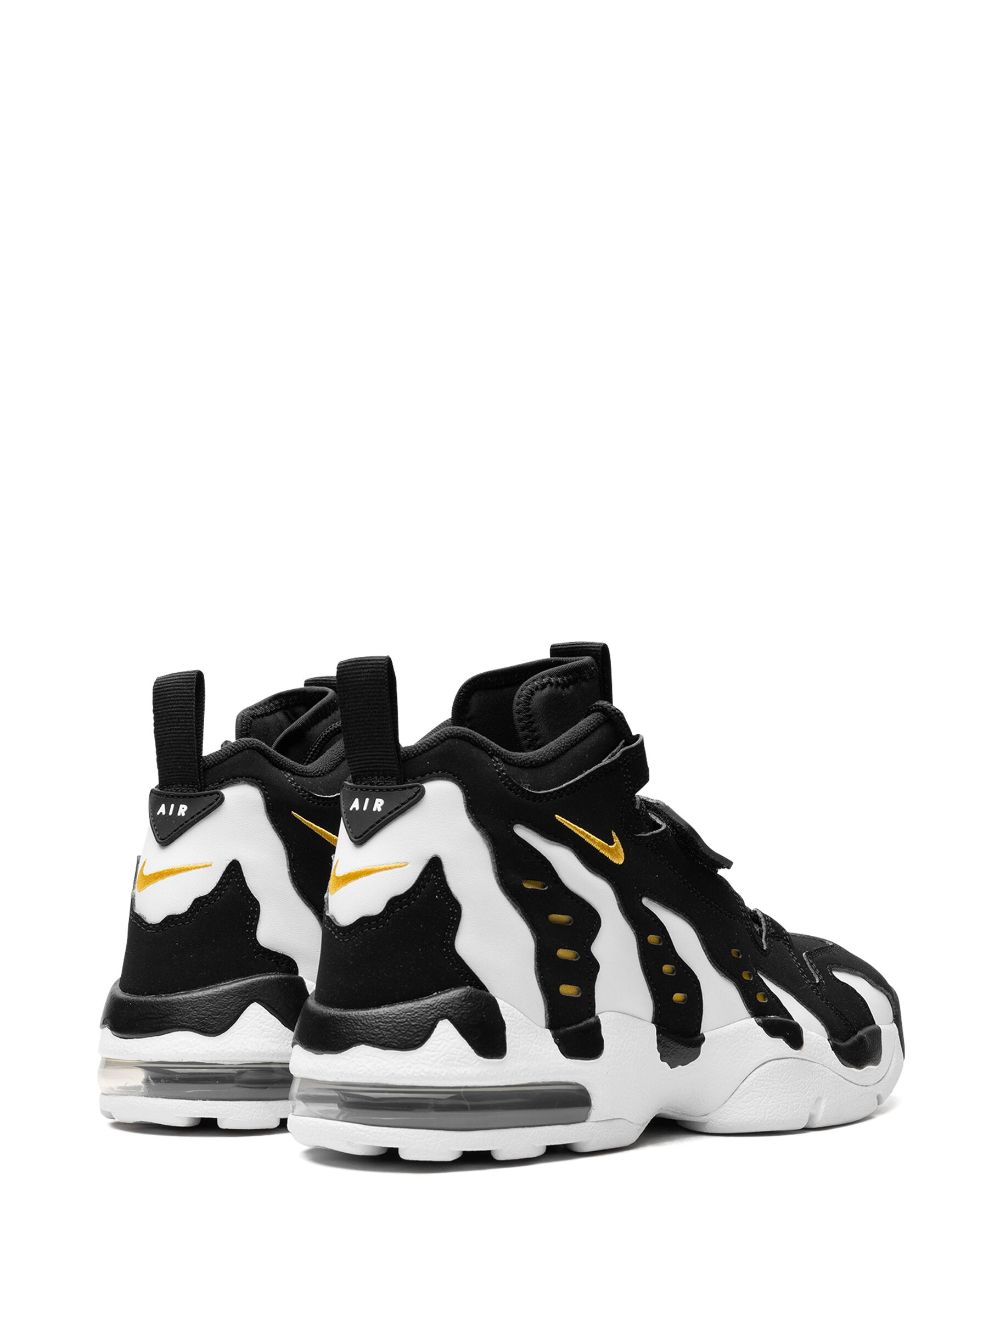 Nike Air DT Max '96 Black Varsity Maize Sneakers - Farfetch